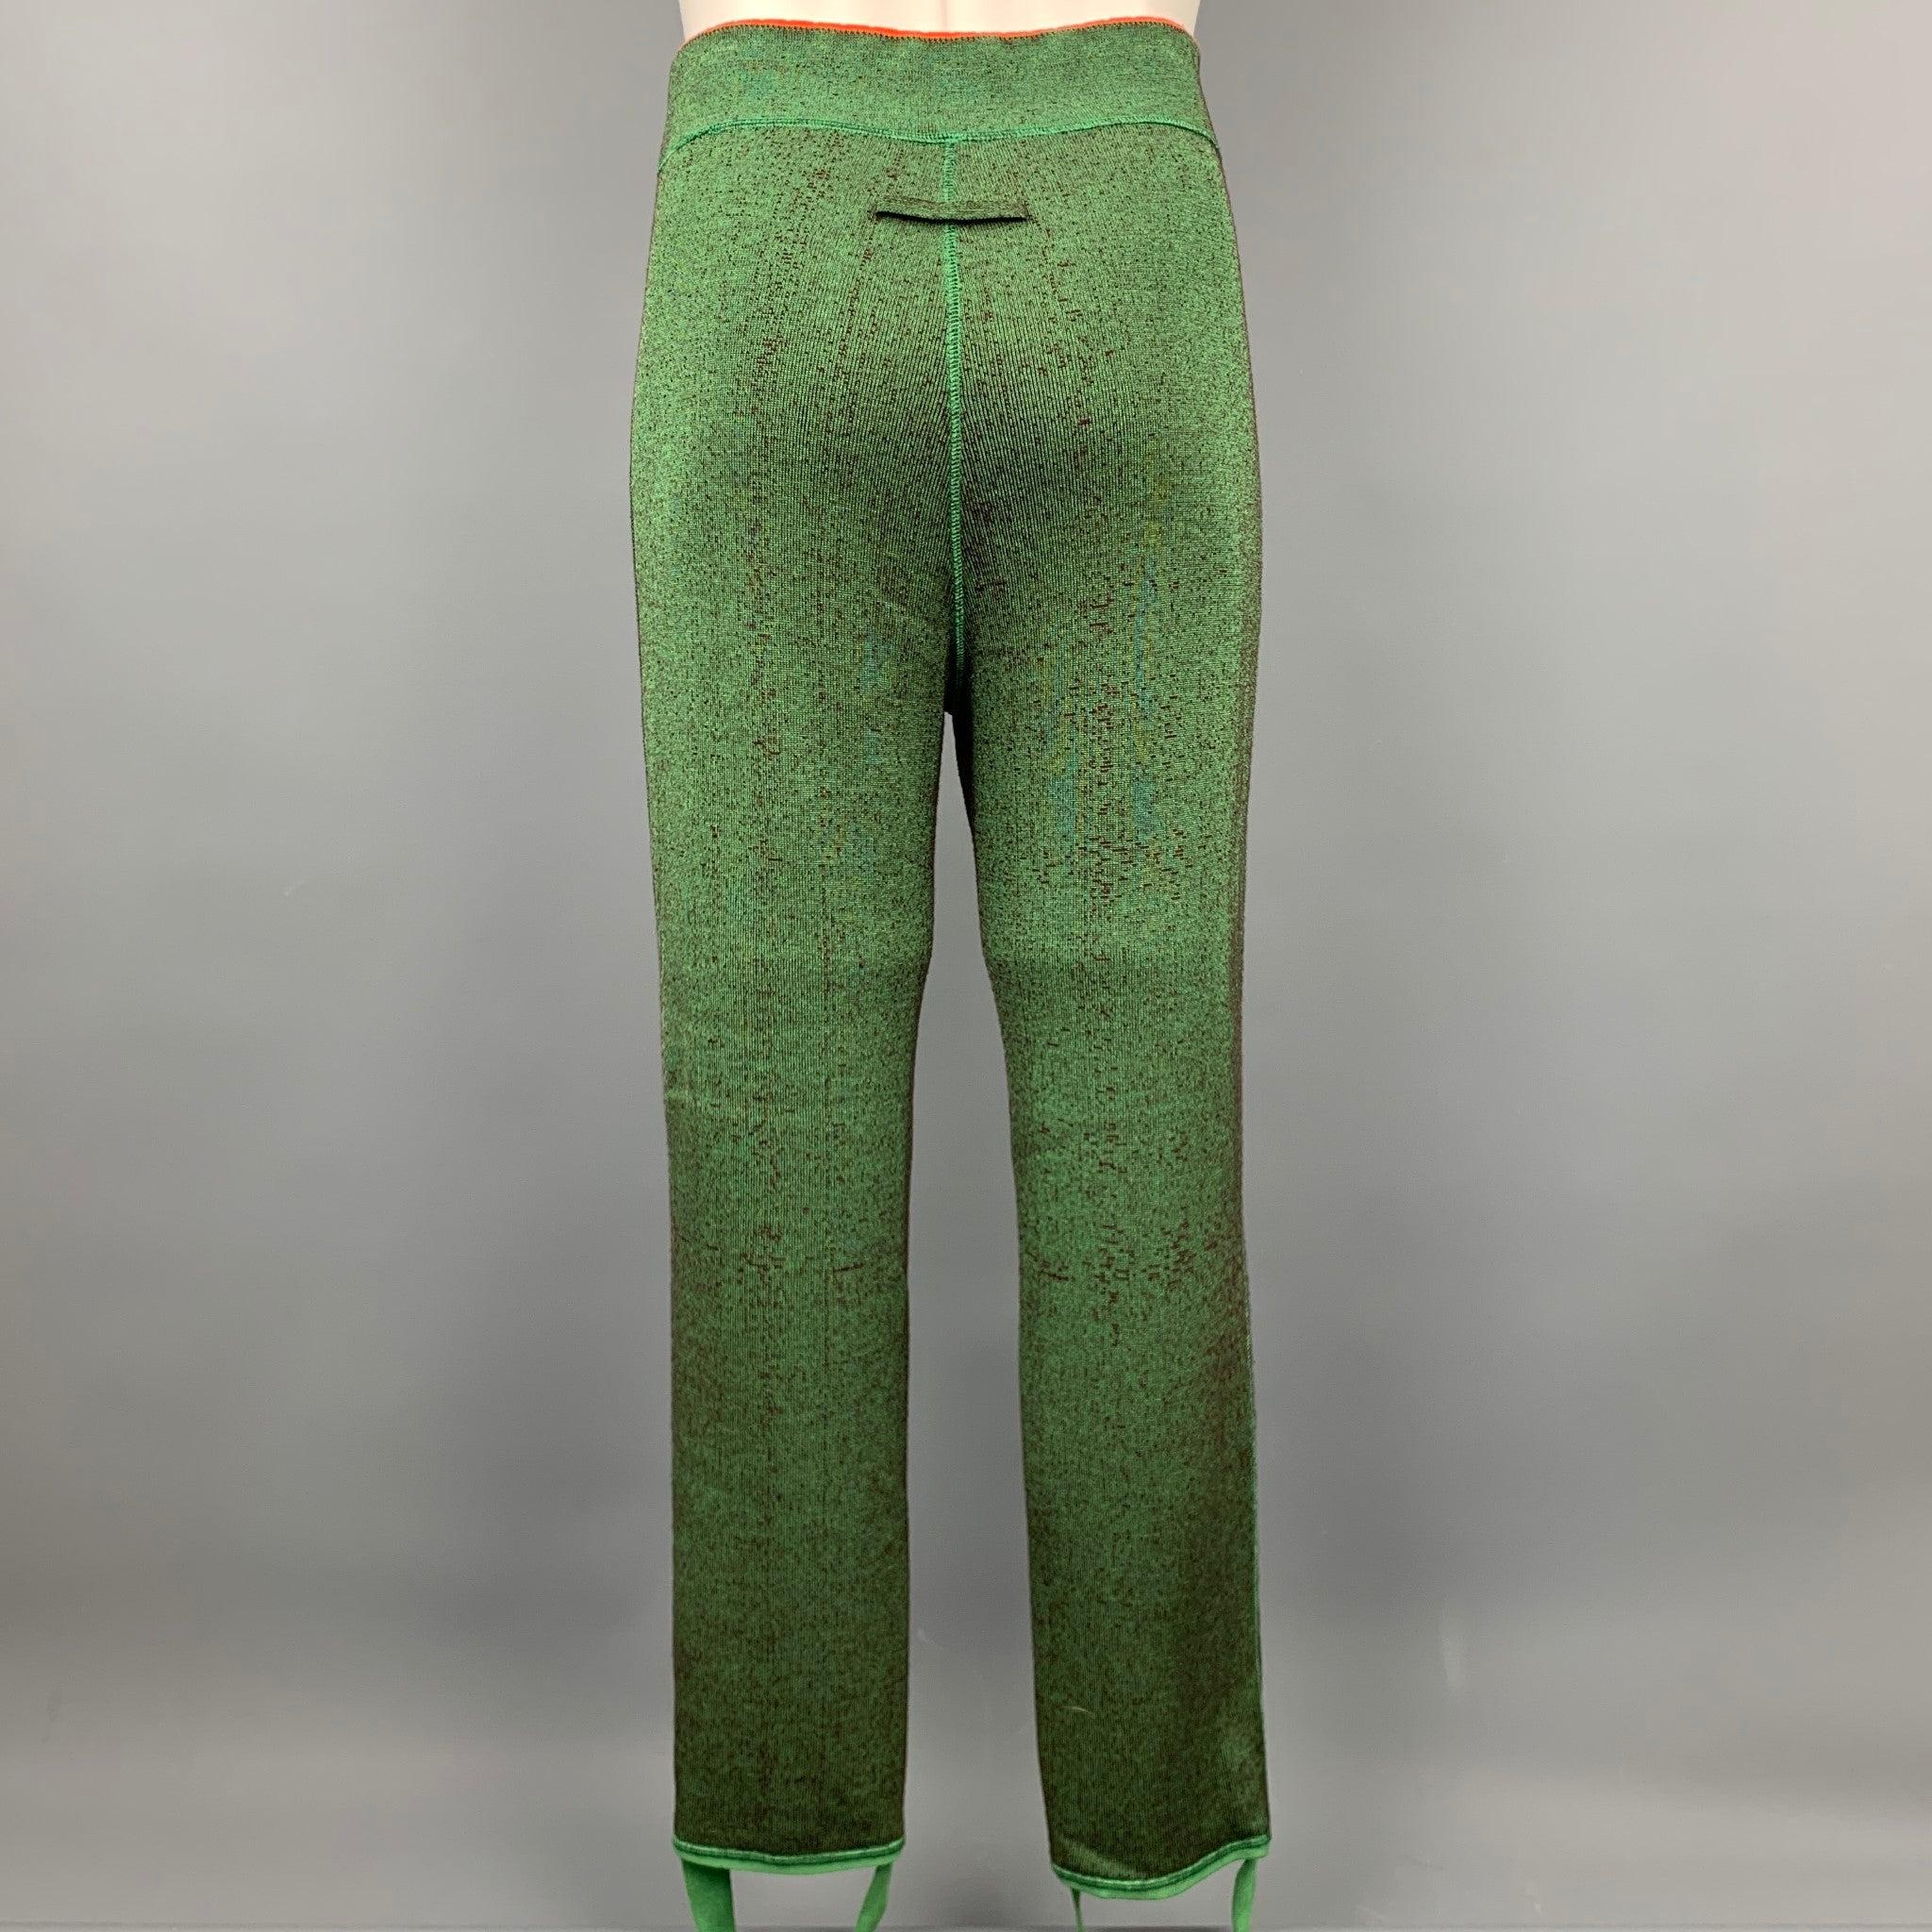 JEAN PAUL GAULTIER sweatpants comes in a green & orange textured material featuring a reversible style, leg straps, elastic waistband, and signature gaultier back tab design.
Very Good
Pre-Owned Condition. 

Marked:   No brand, no size, no care tag